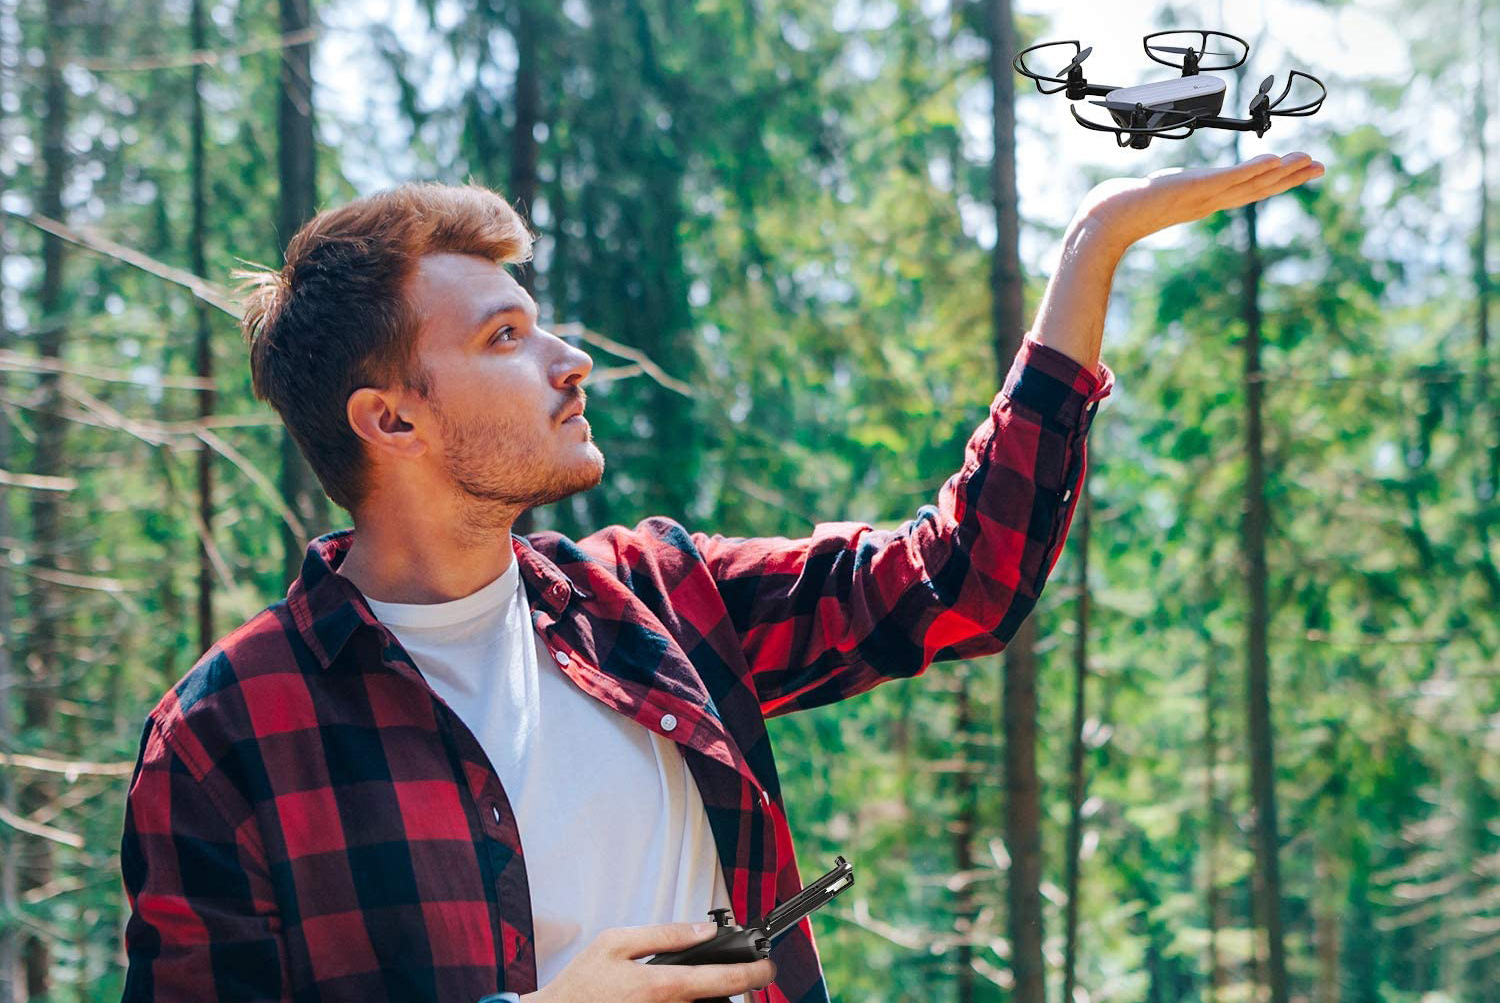 Final likelihood: Earn a 2K camera drone that folds up as tiny as a cell phone for $60